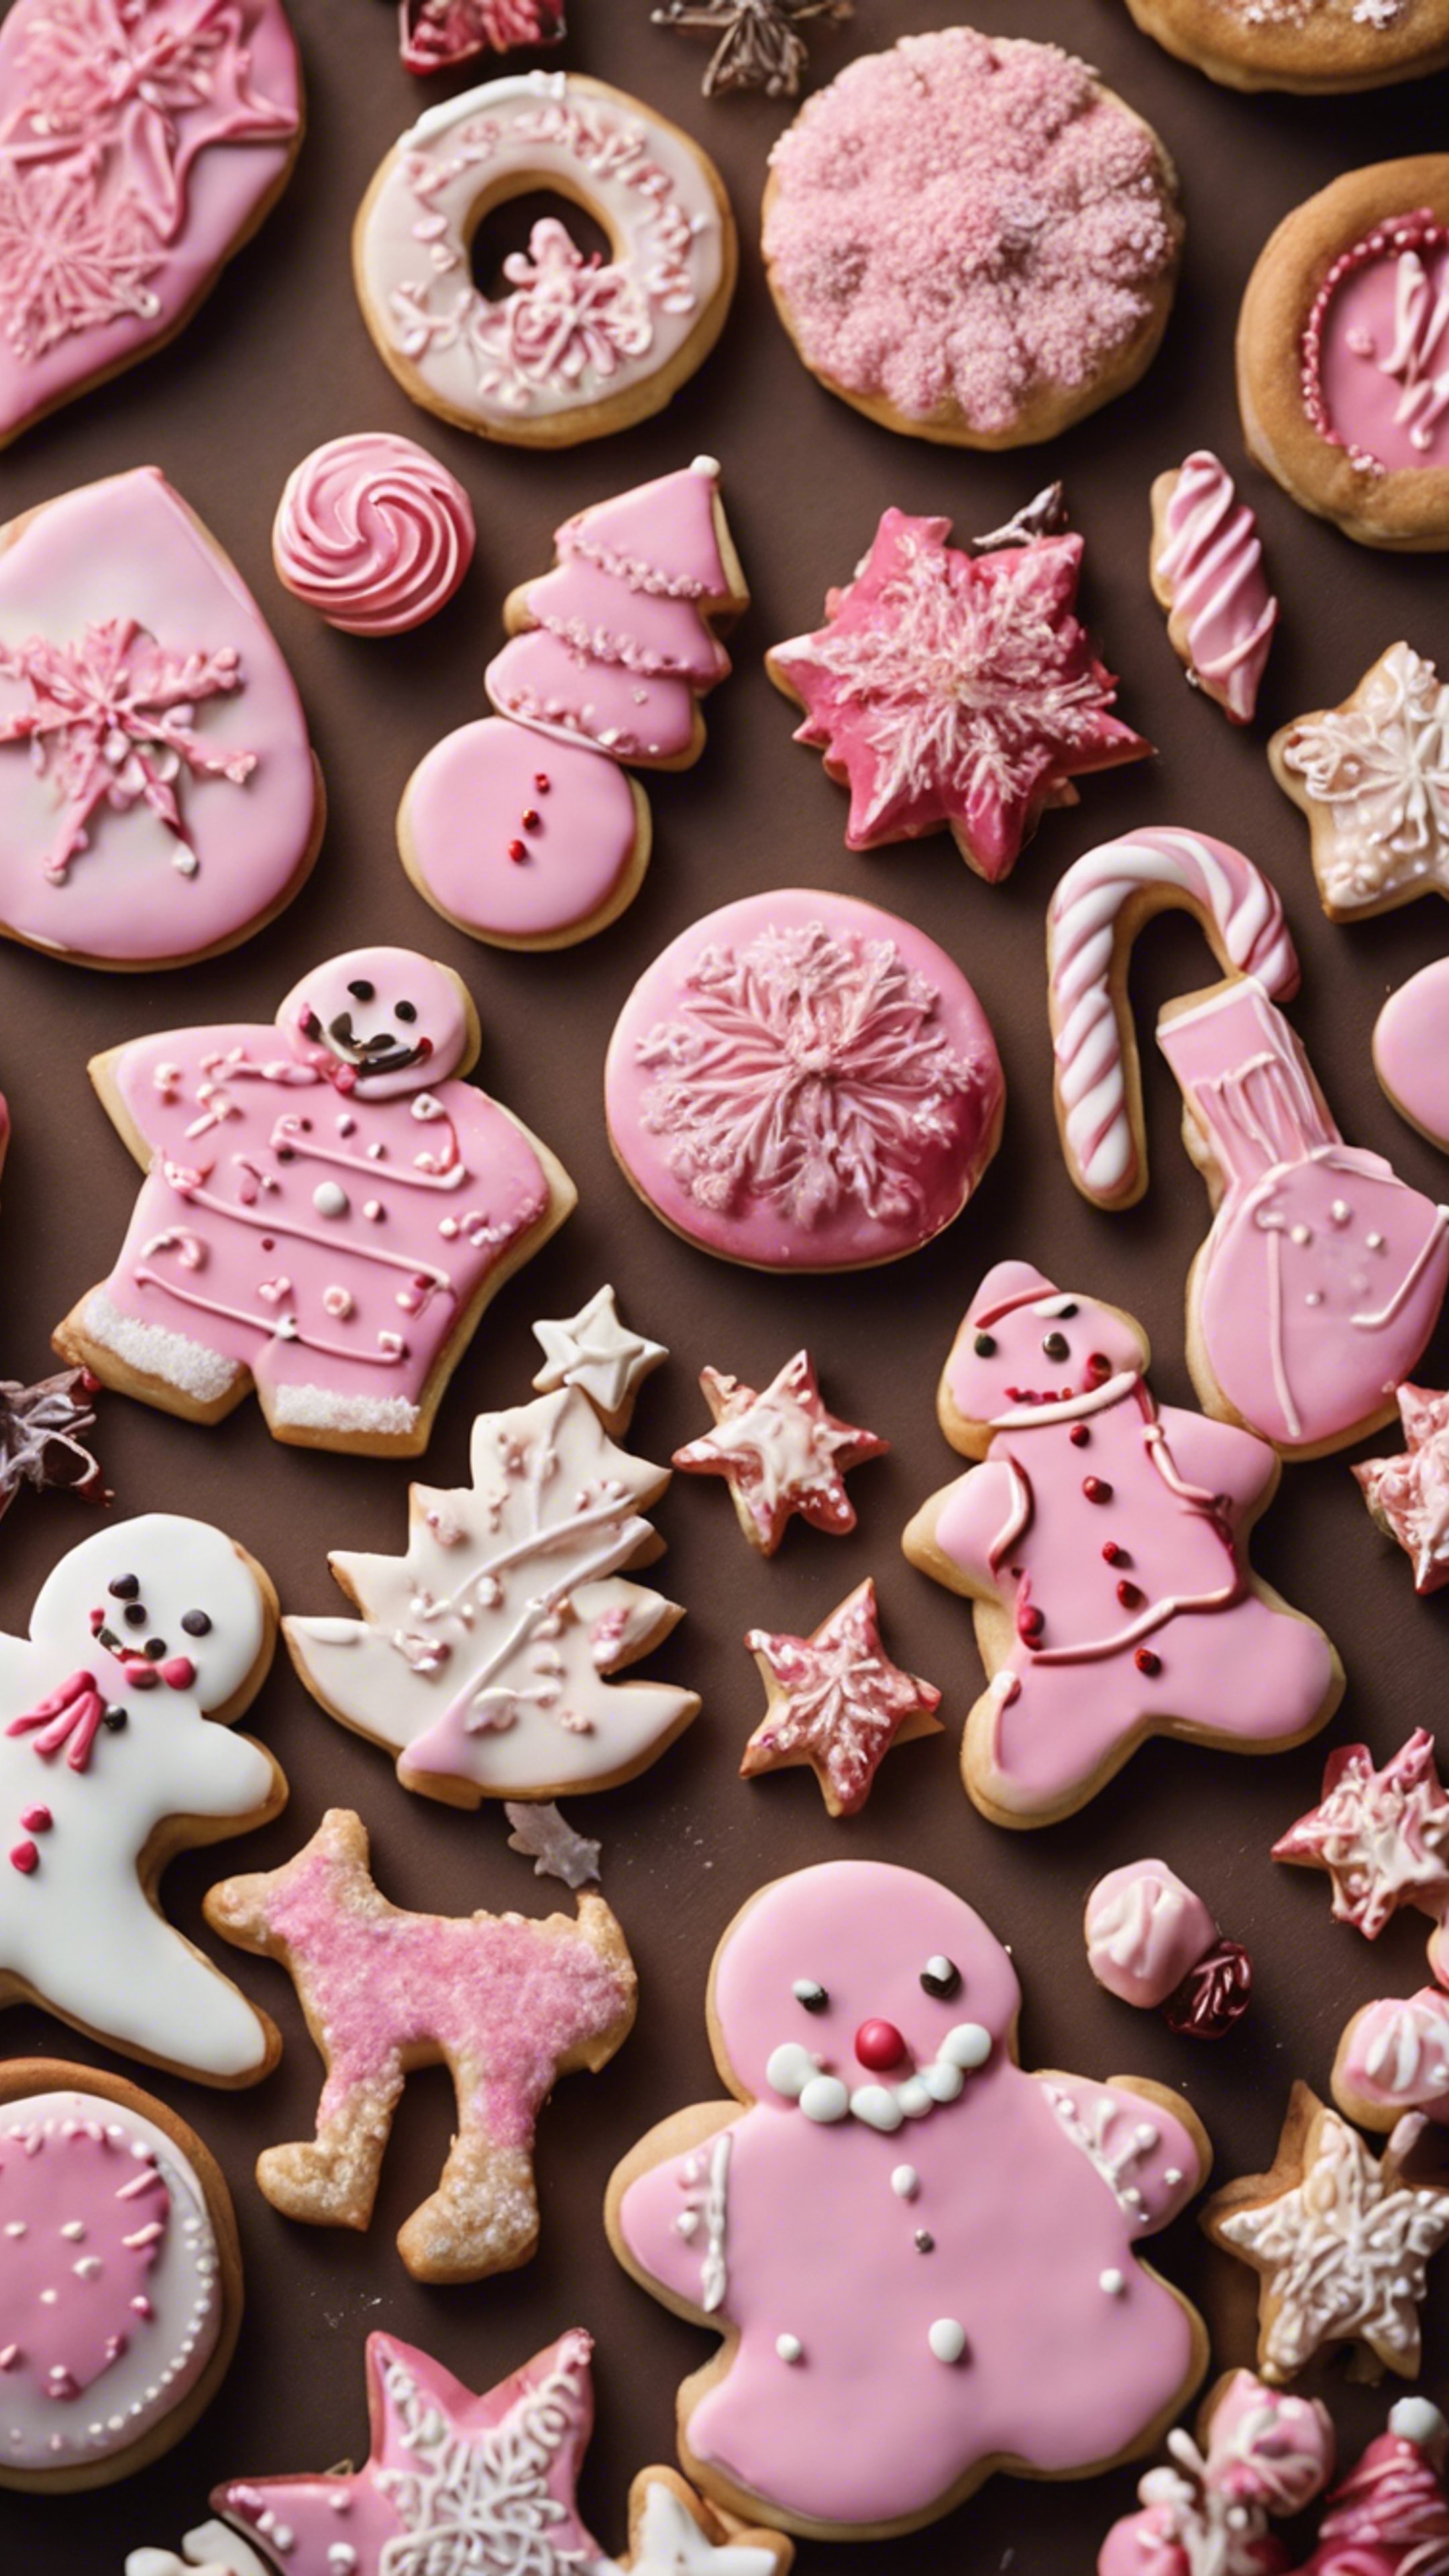 Various types of pink Christmas cookies and sweets laid on a table with festive decorations. Wallpaper[bb72647e6a9944a5b5aa]